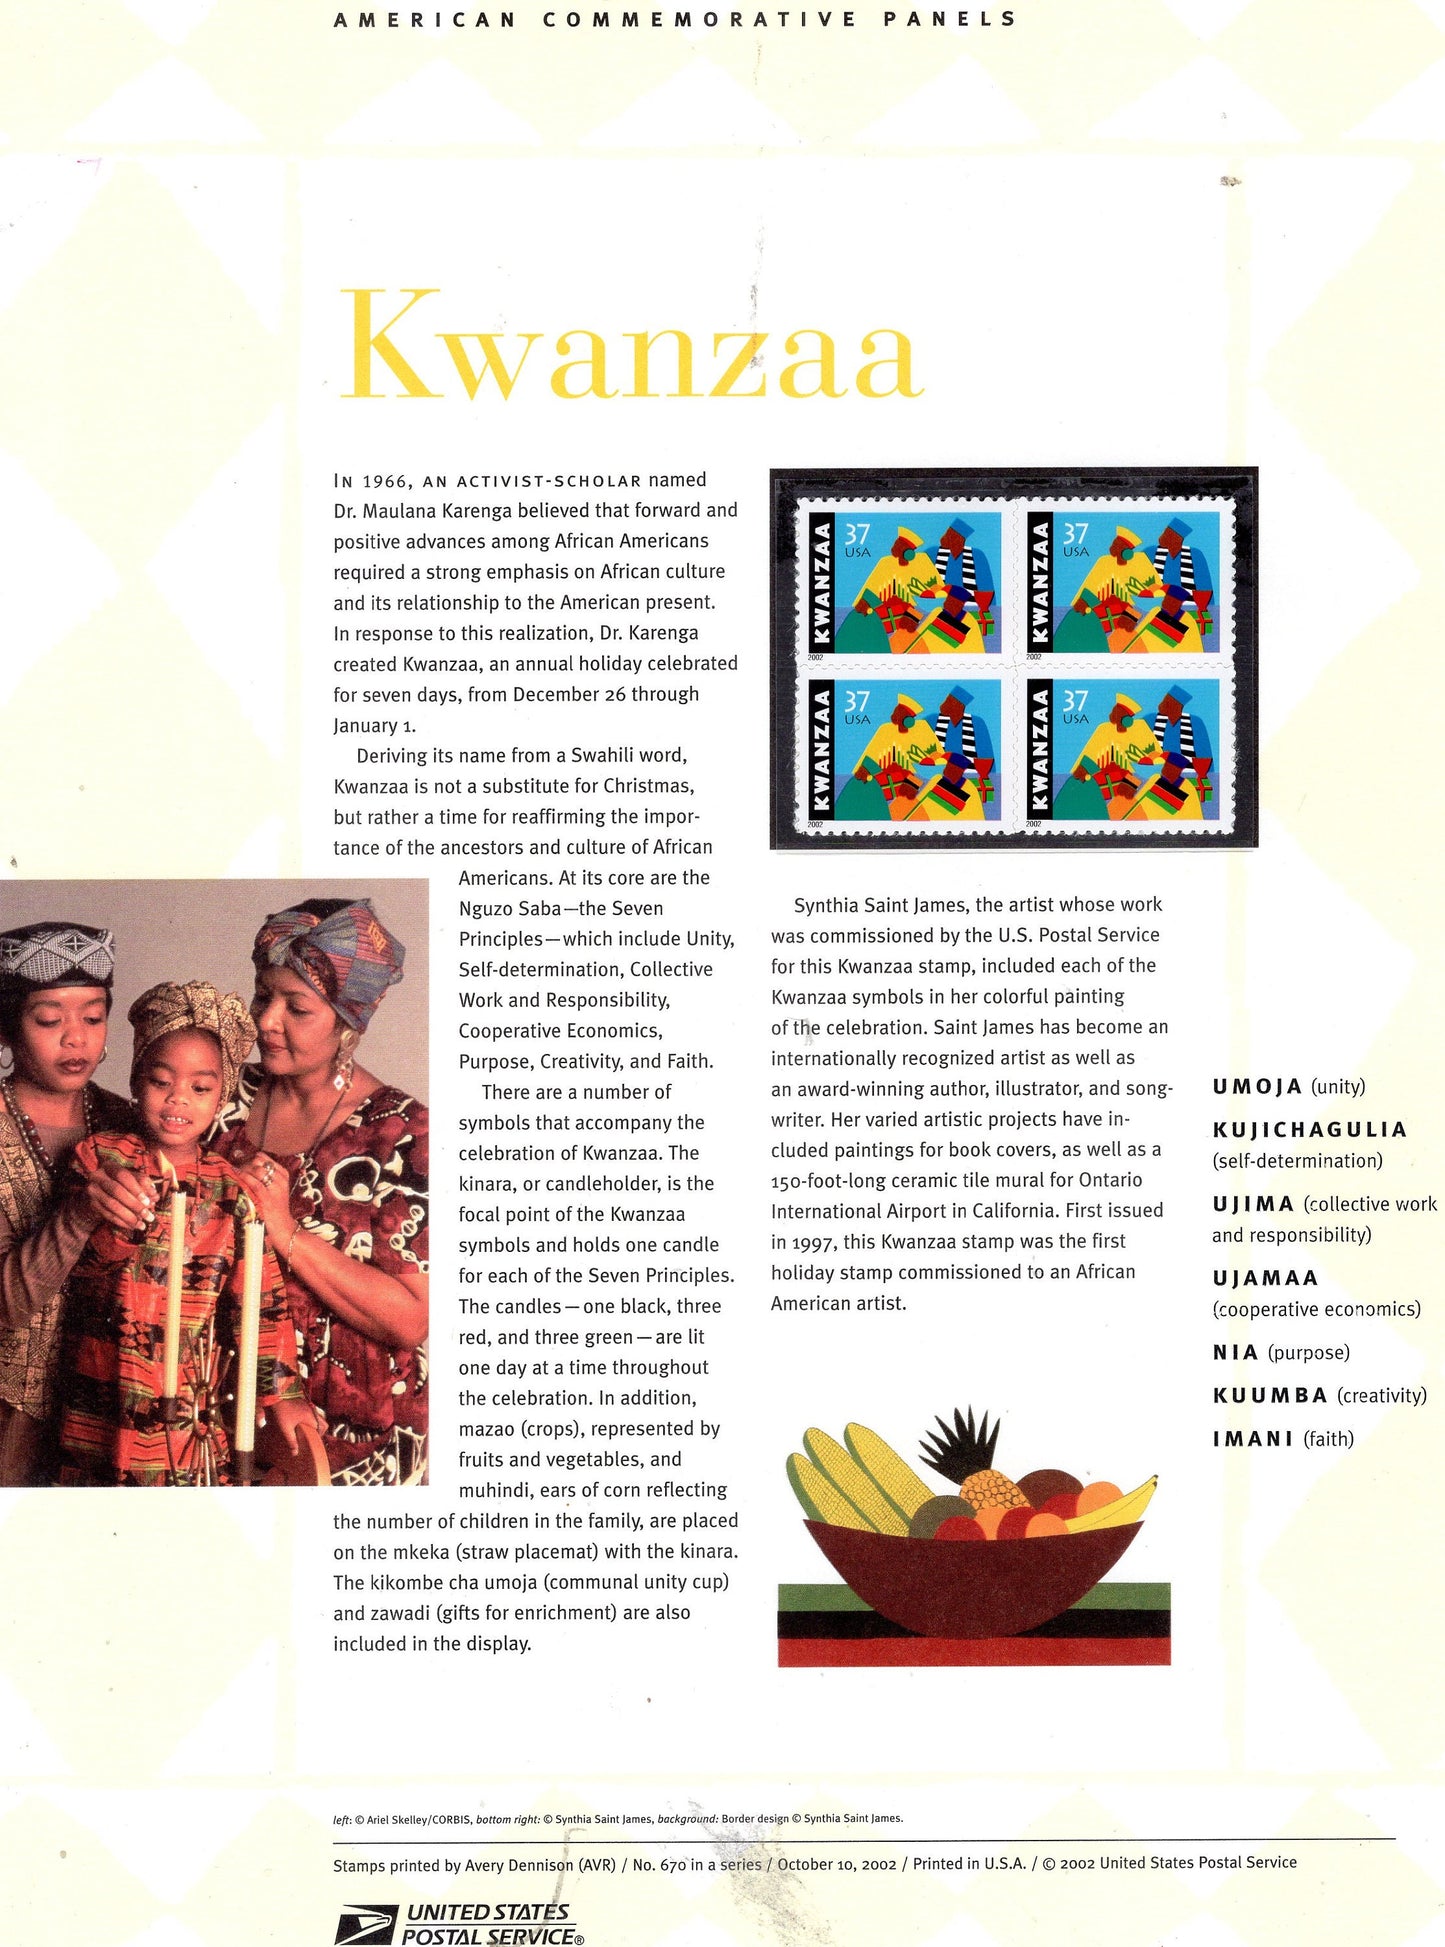 KWANZAA CELEBRATION Commemorative Panel with a Block of 4 Stamps Illustrations plus Text – A Great Gift 8.5x11 - Issued in 2002 s670-